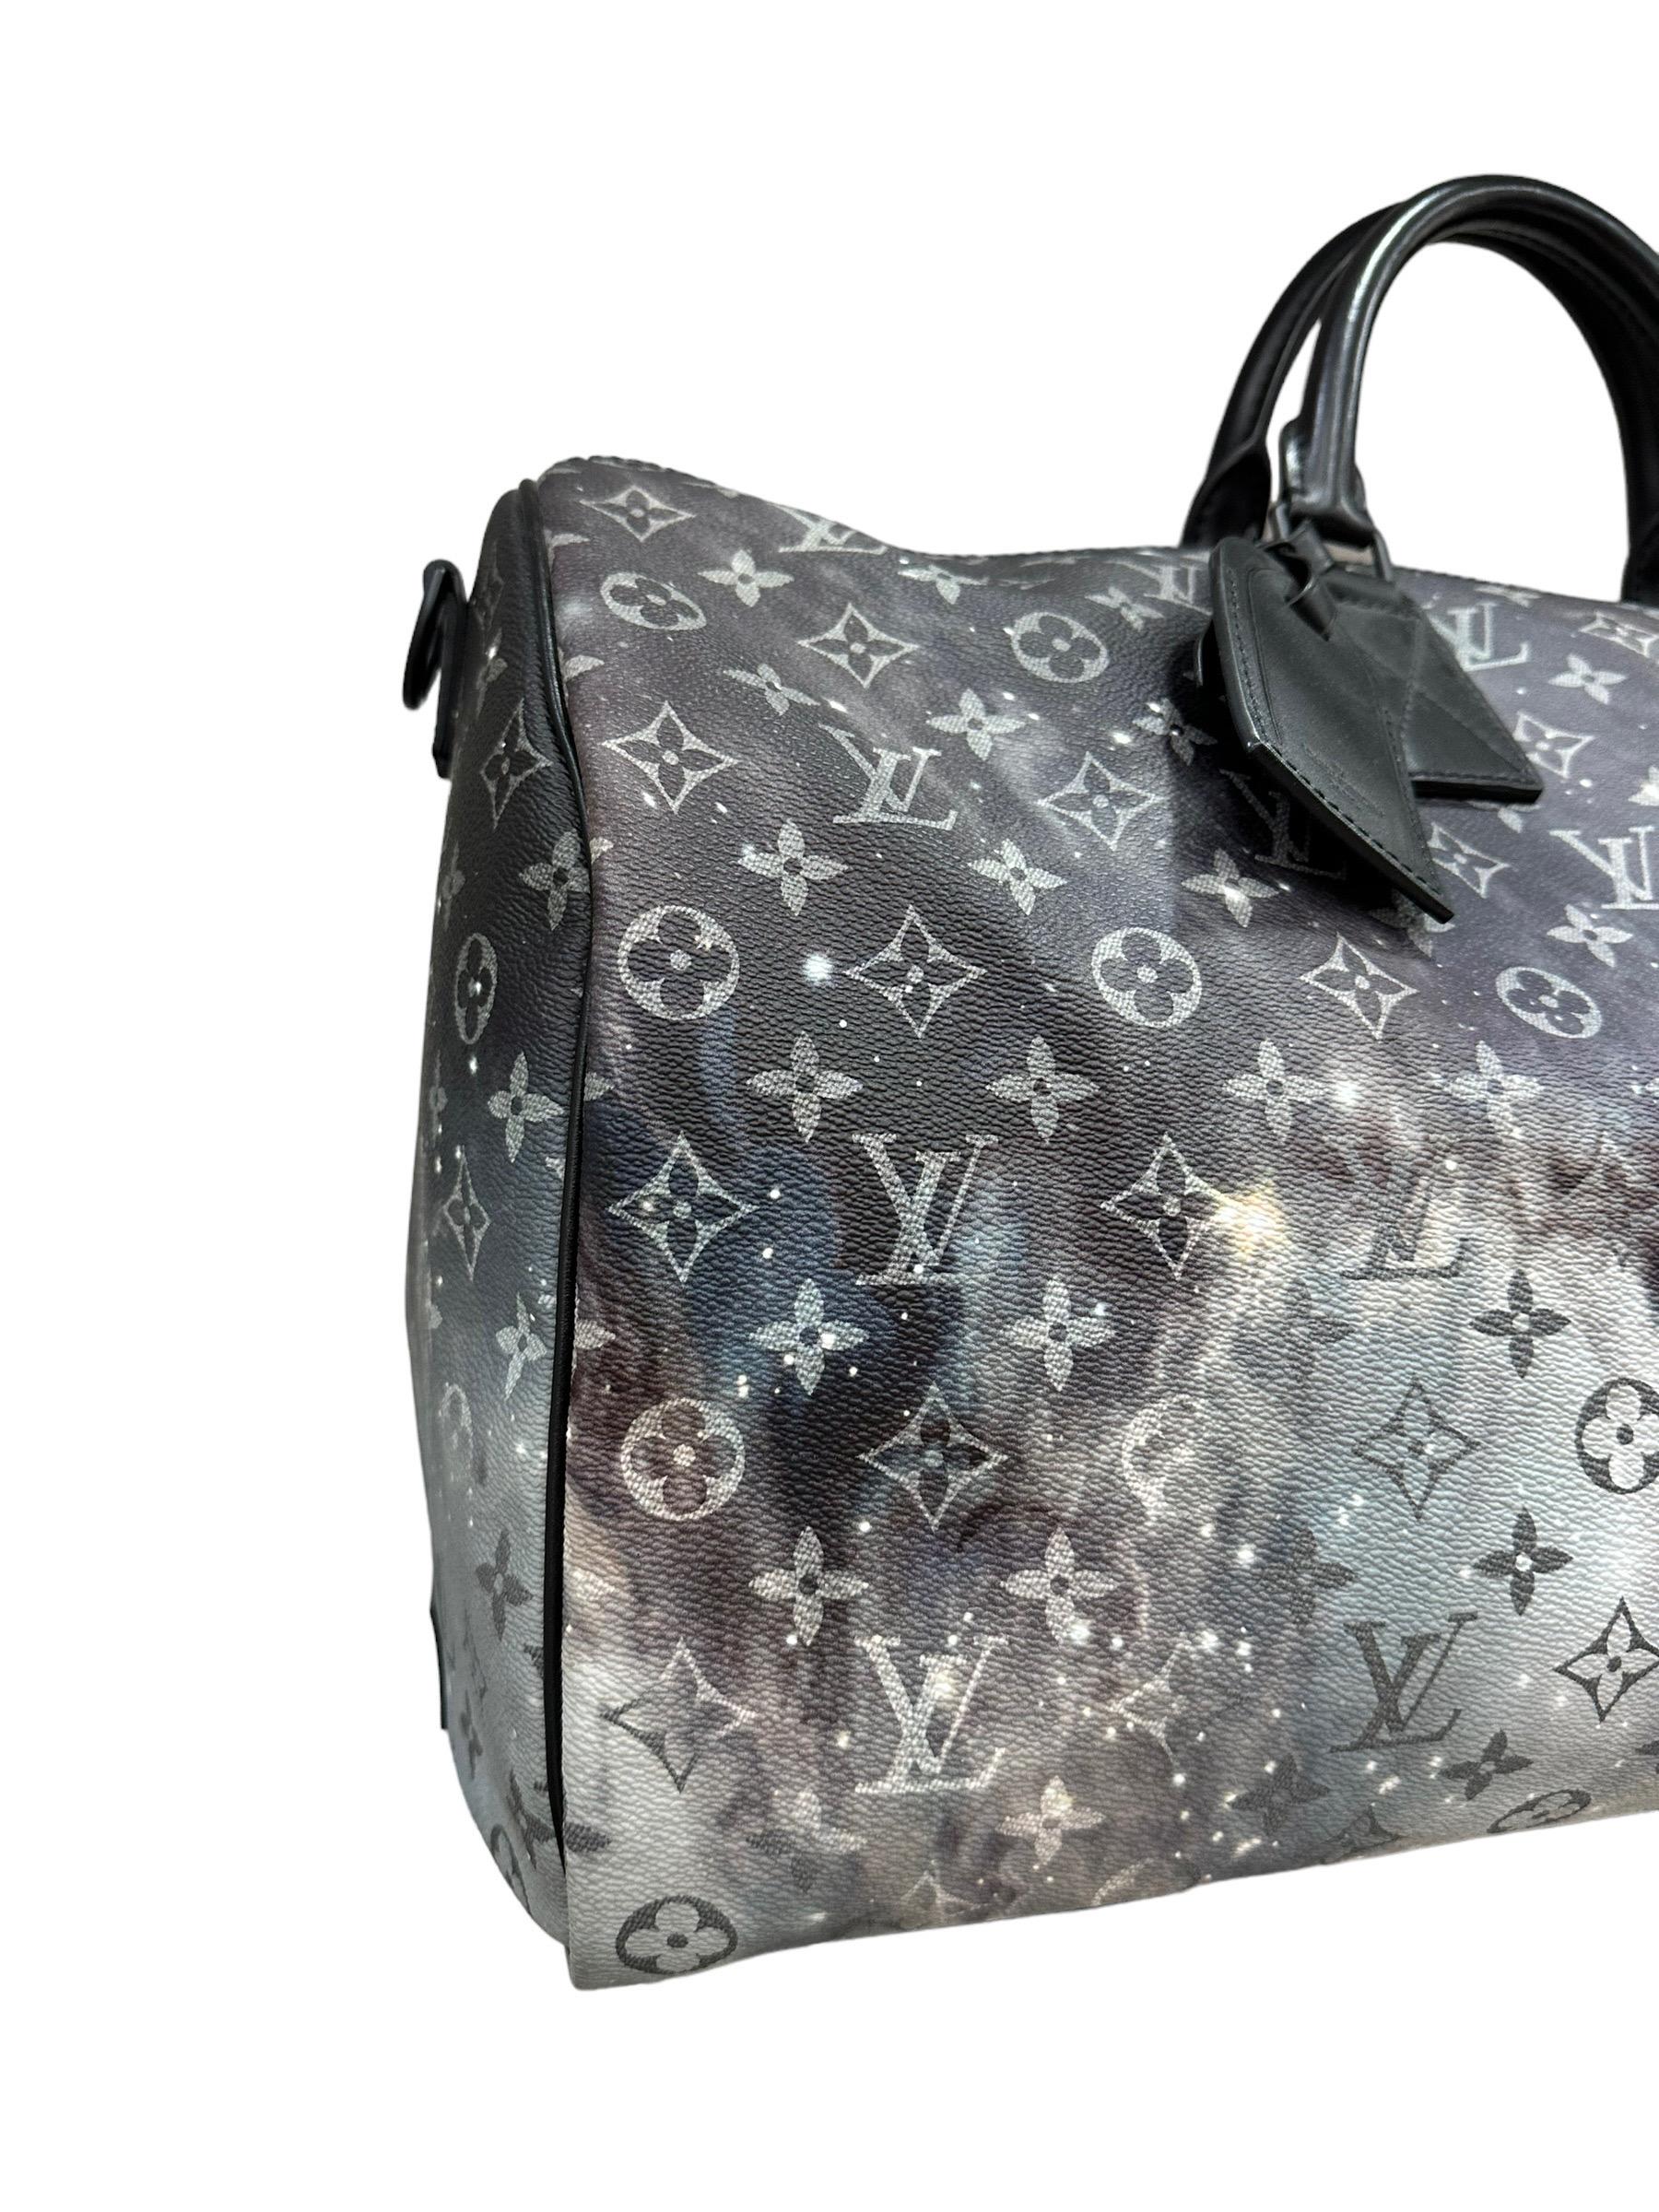 Women's or Men's Louis Vuitton Galaxy Keepall Bandouliere 50 Limited Edition Travel Bag For Sale